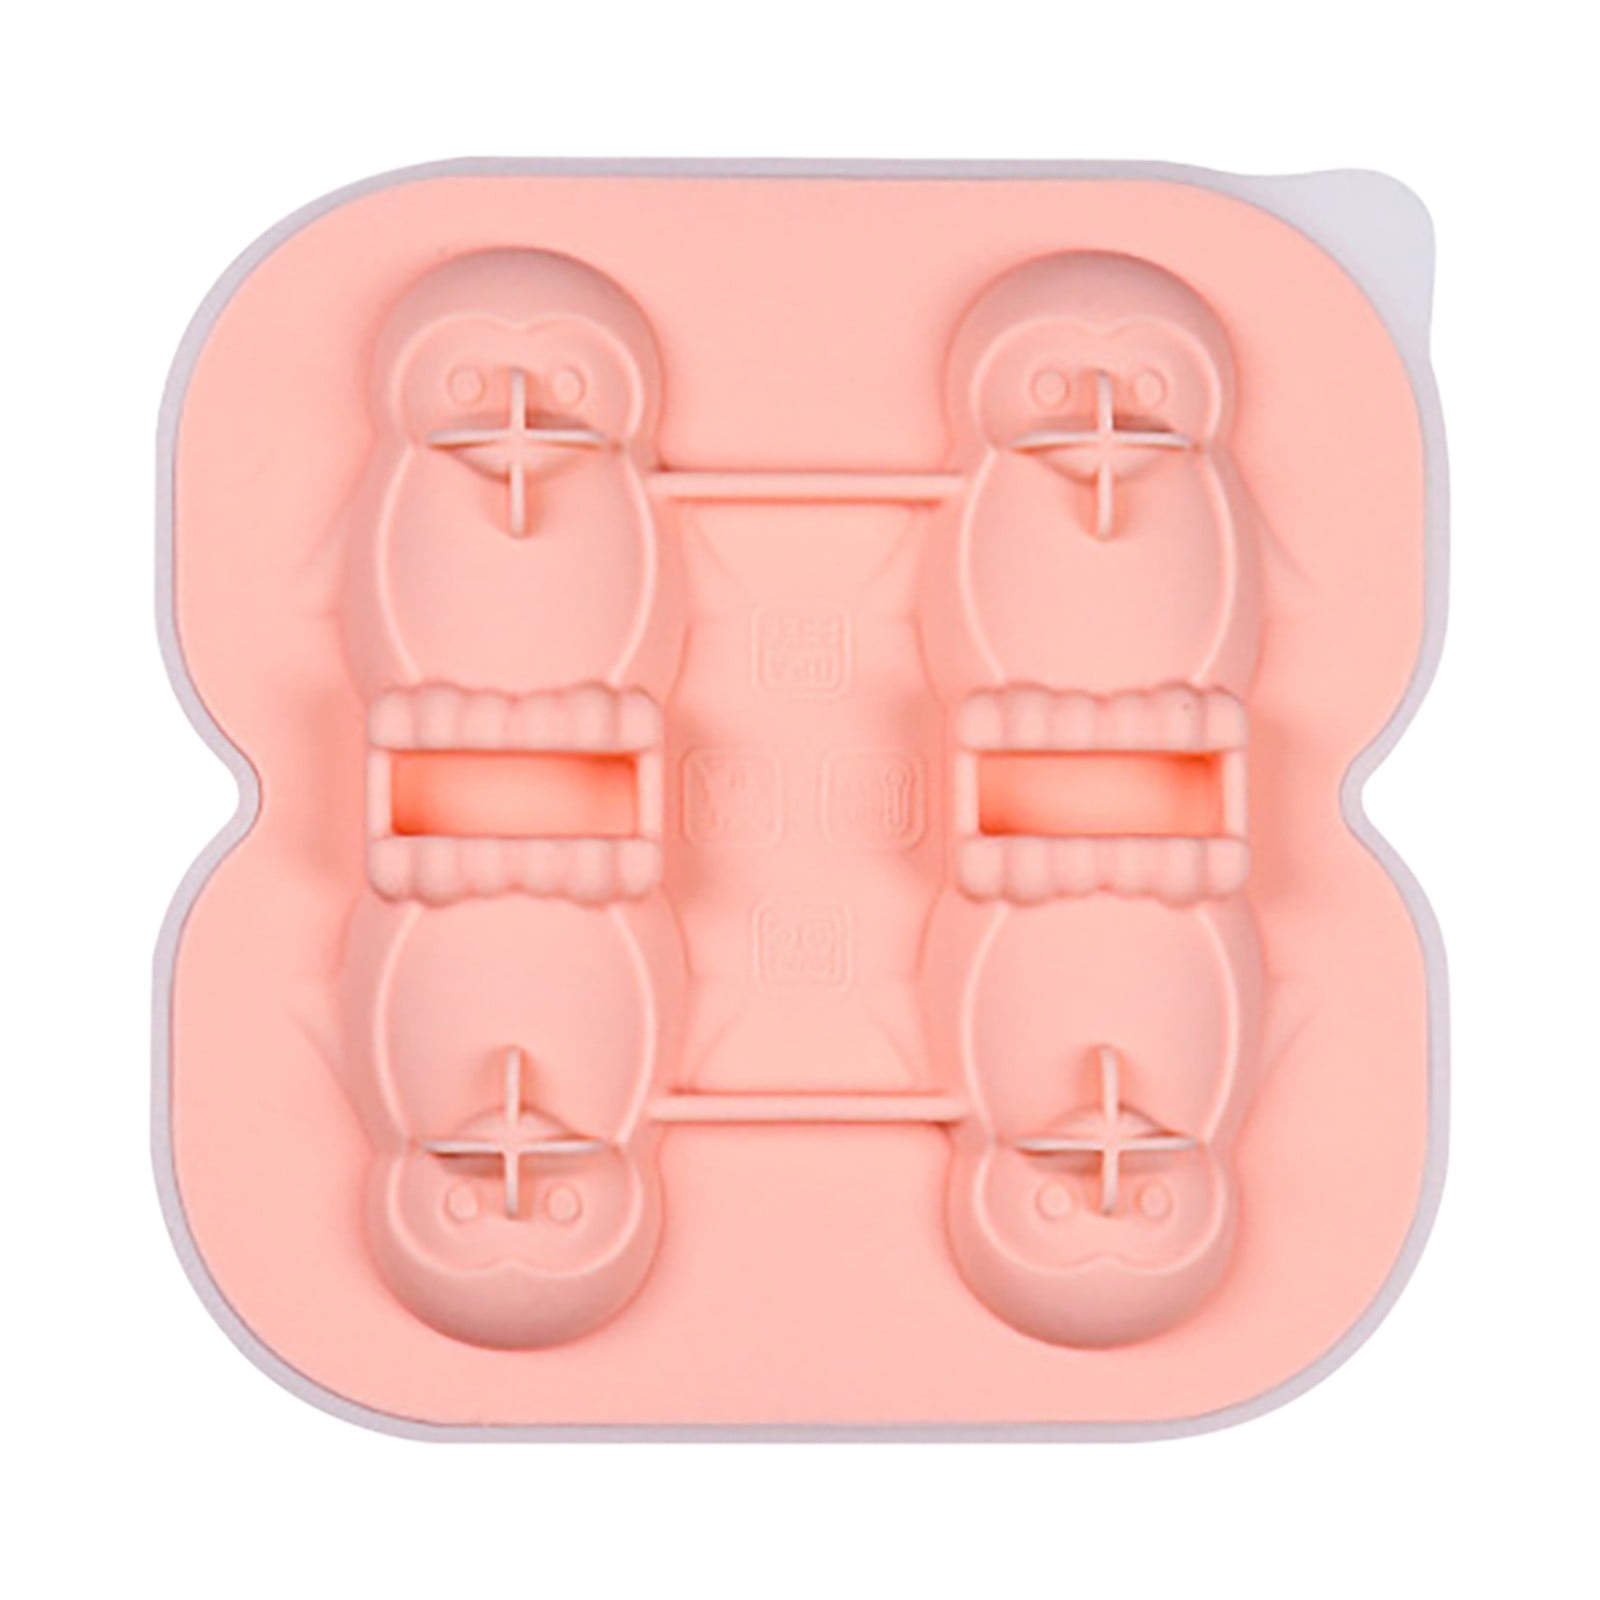  Fun Ice Cube Trays, Penguin Ice Cube Tray, 3D Cute Penguin Ice  Cube Tray, Novelty Ice Cube Trays, Cute Penguin Ice Maker, 4 Grid 3d Cute  Penguin Ice Tray, Safe and